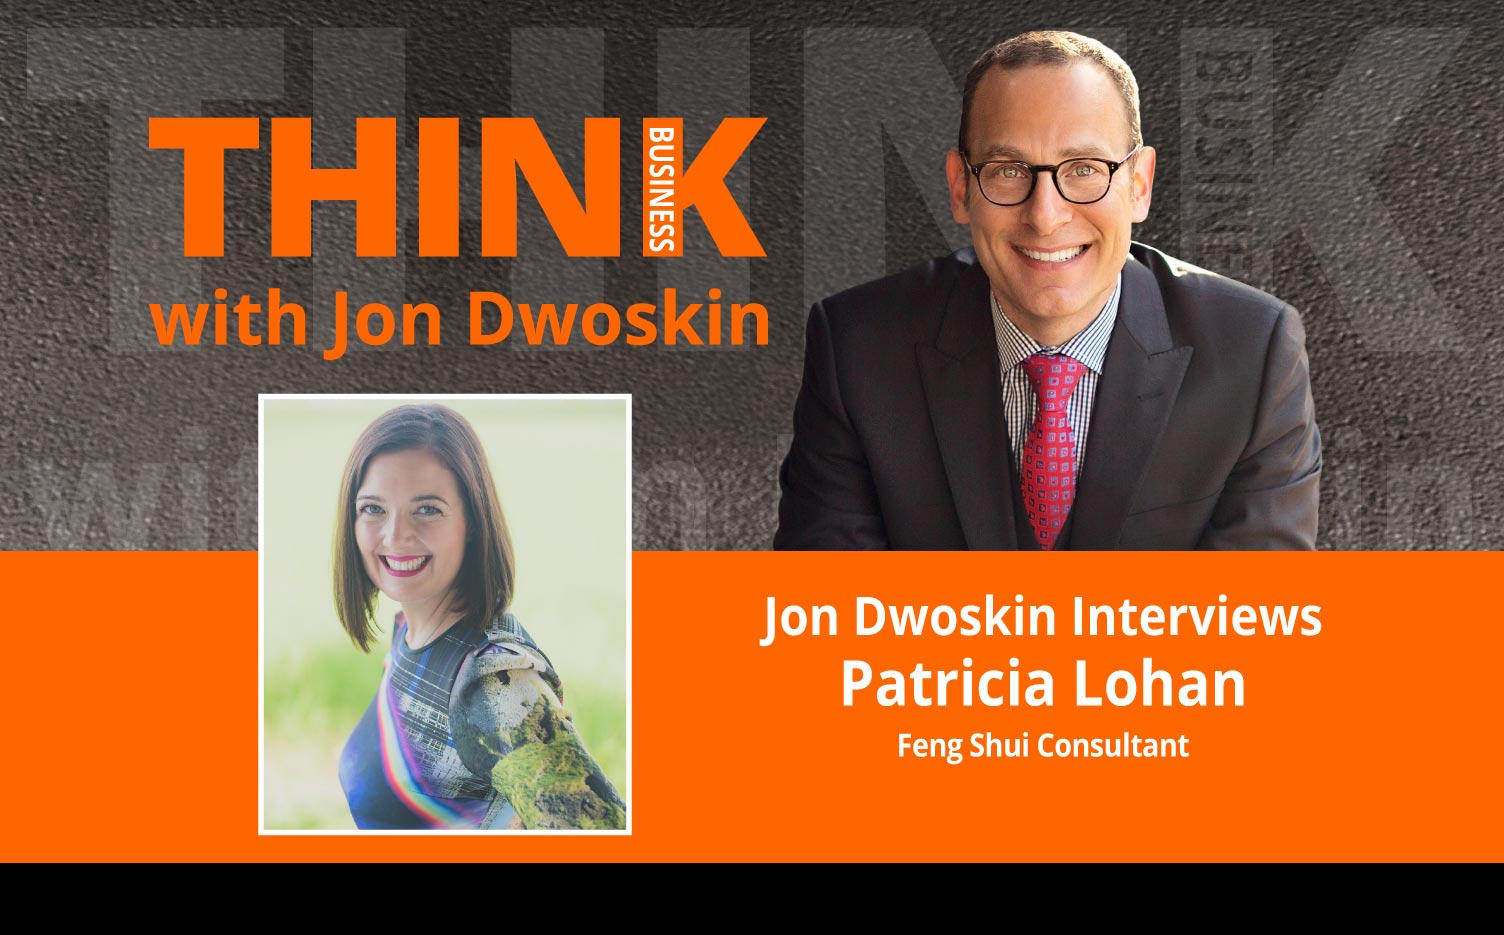 THINK Business Podcast: Jon Dwoskin Interviews Patricia Lohan, Feng Shui Consultant